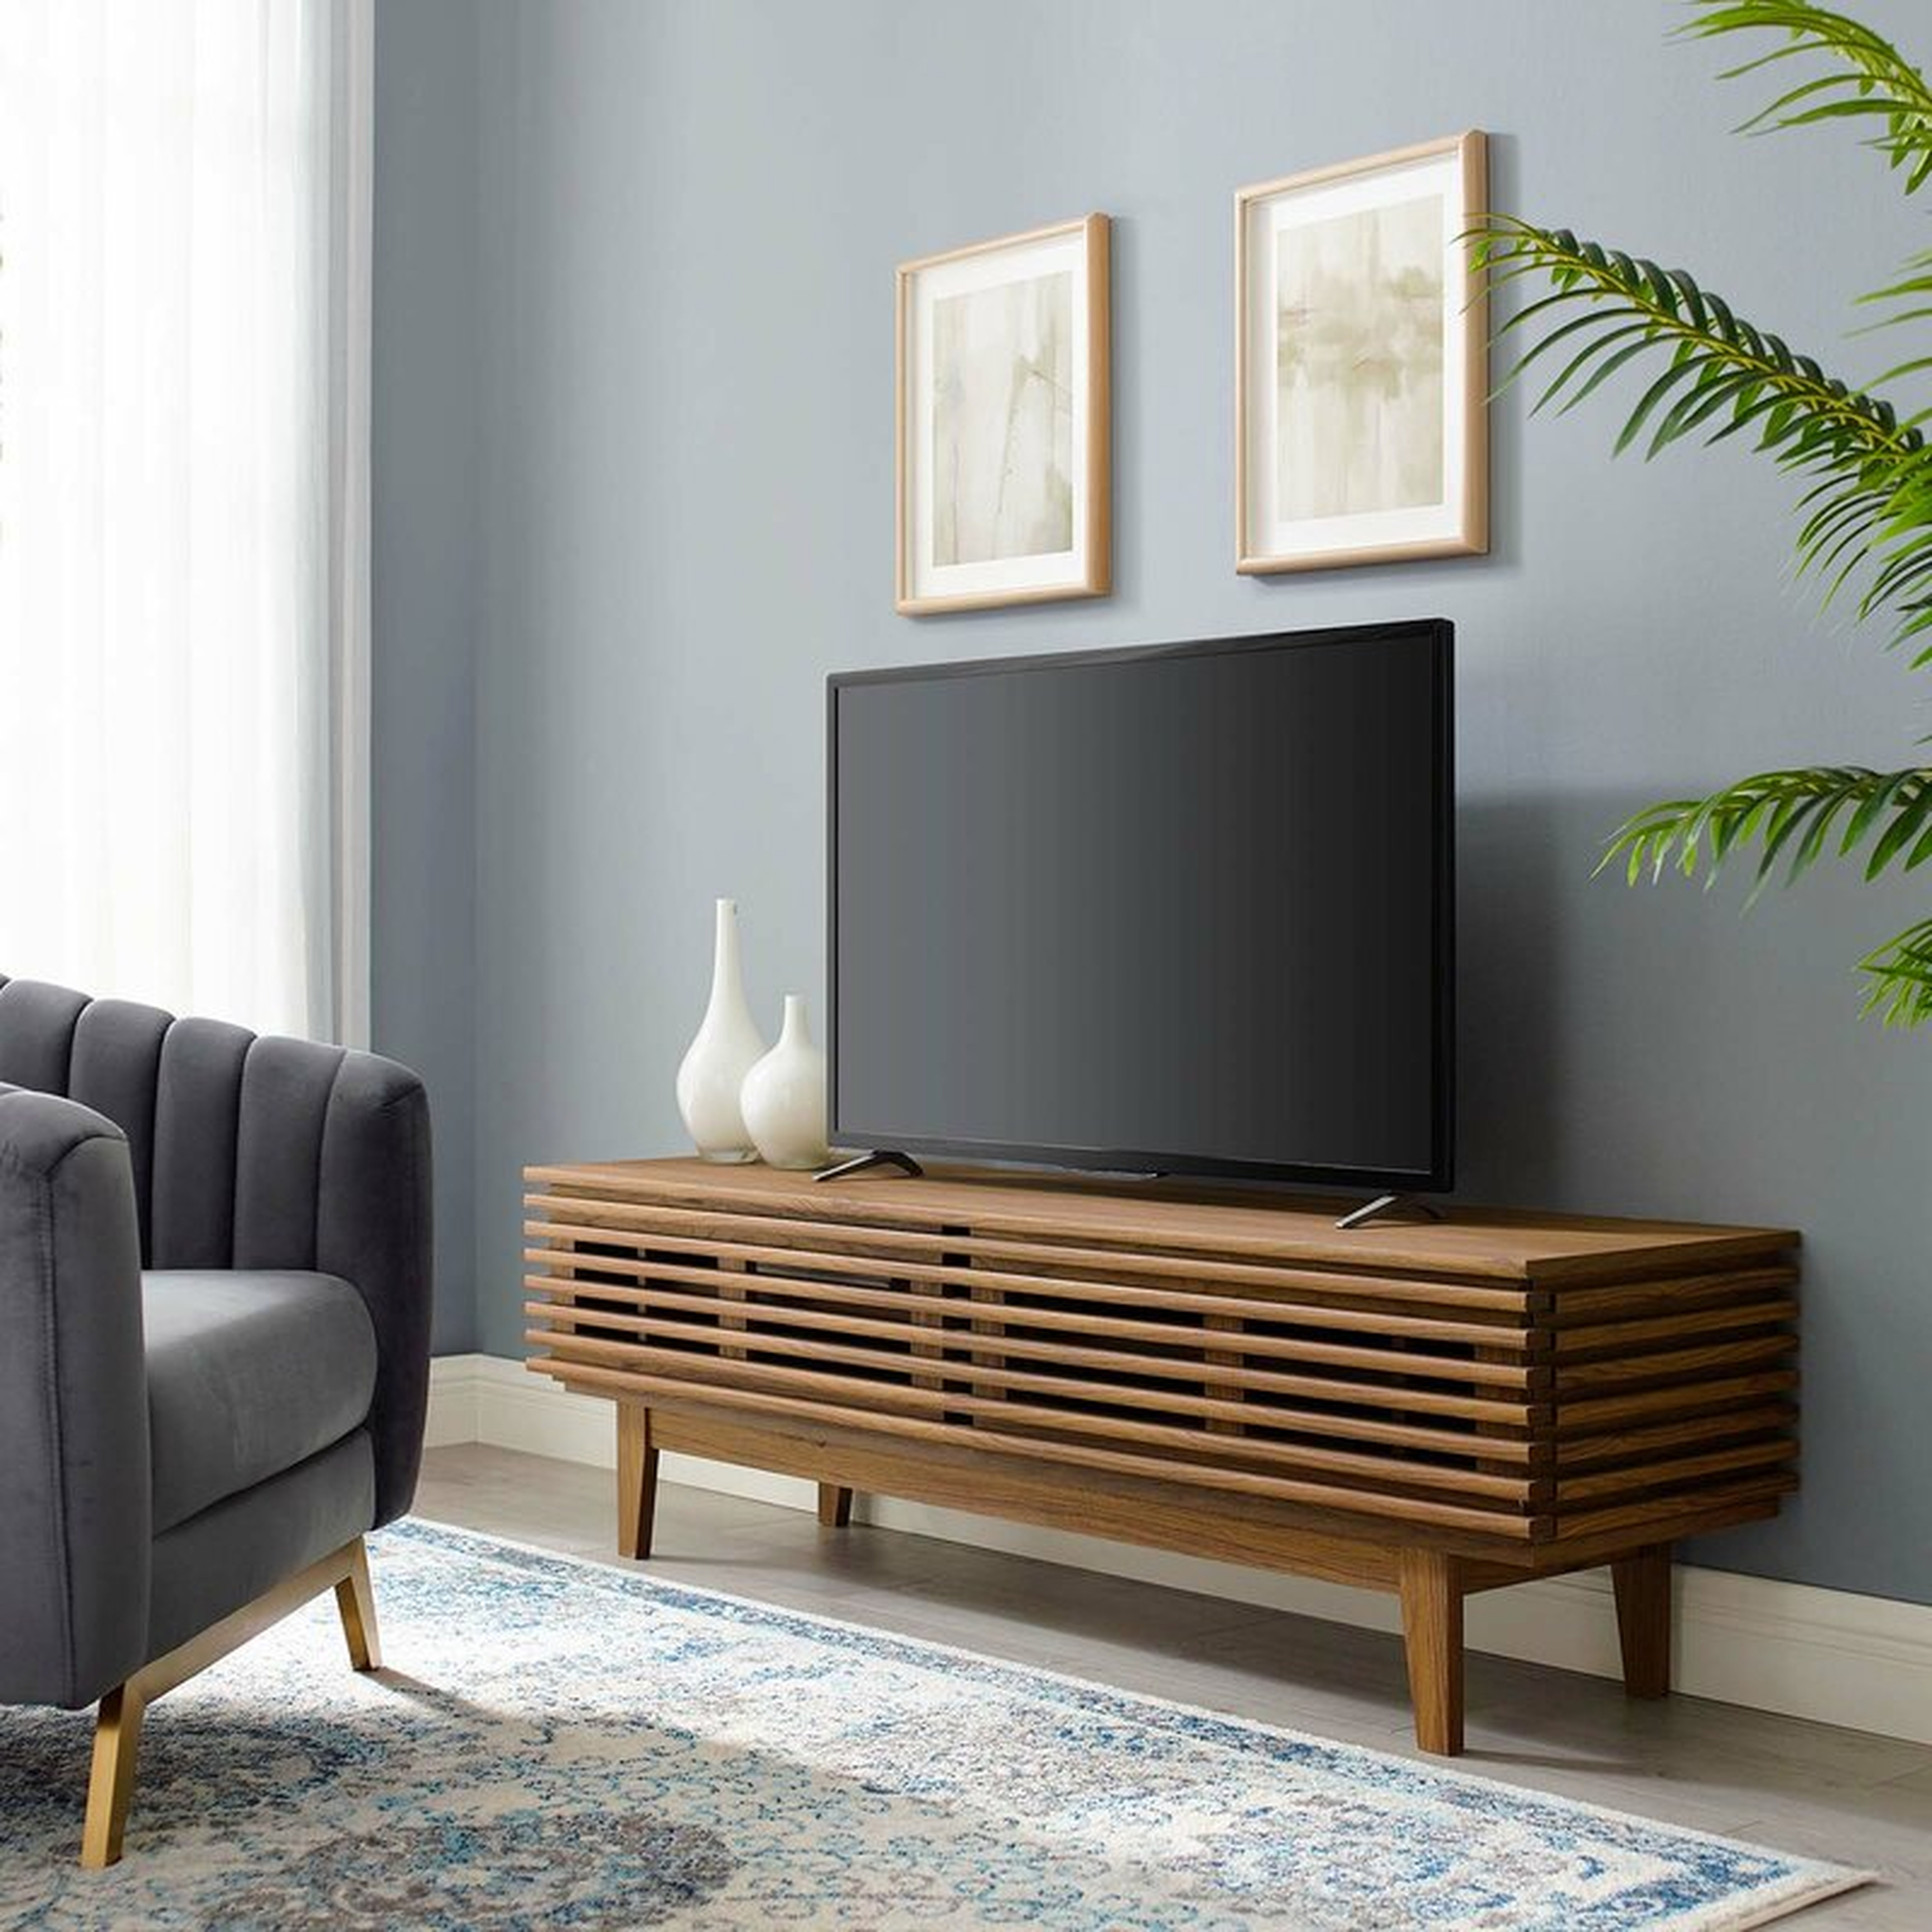 Wigington TV Stand for TVs up to 70"; Back in Stock Jan 1, 2021. - Wayfair